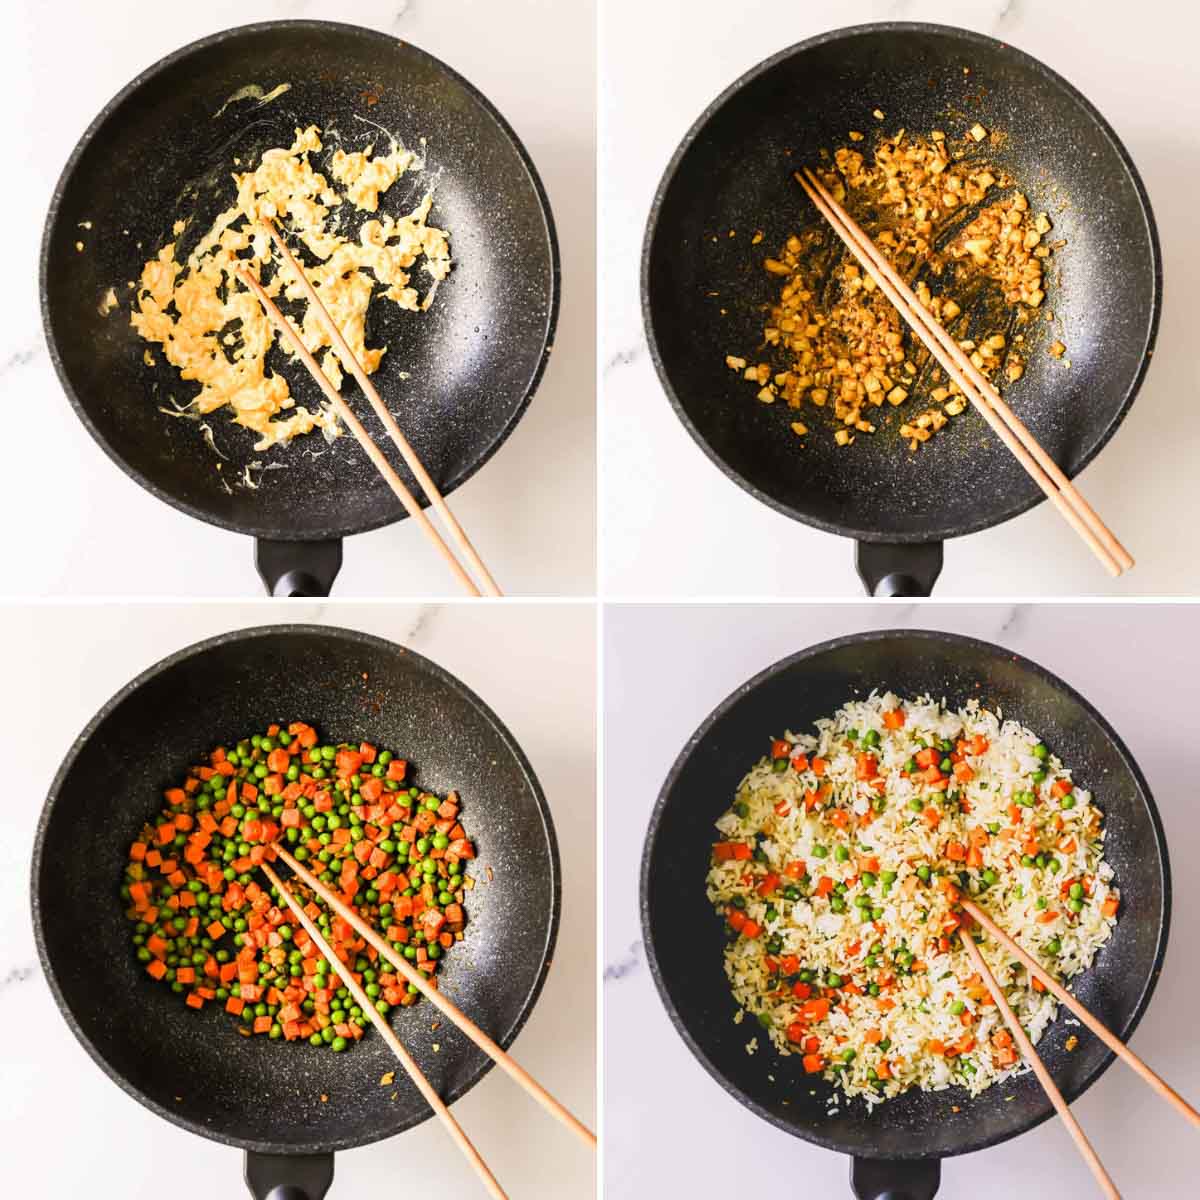 Four images showing the process of making fried rice with eggs, onions, peas, and carrots.